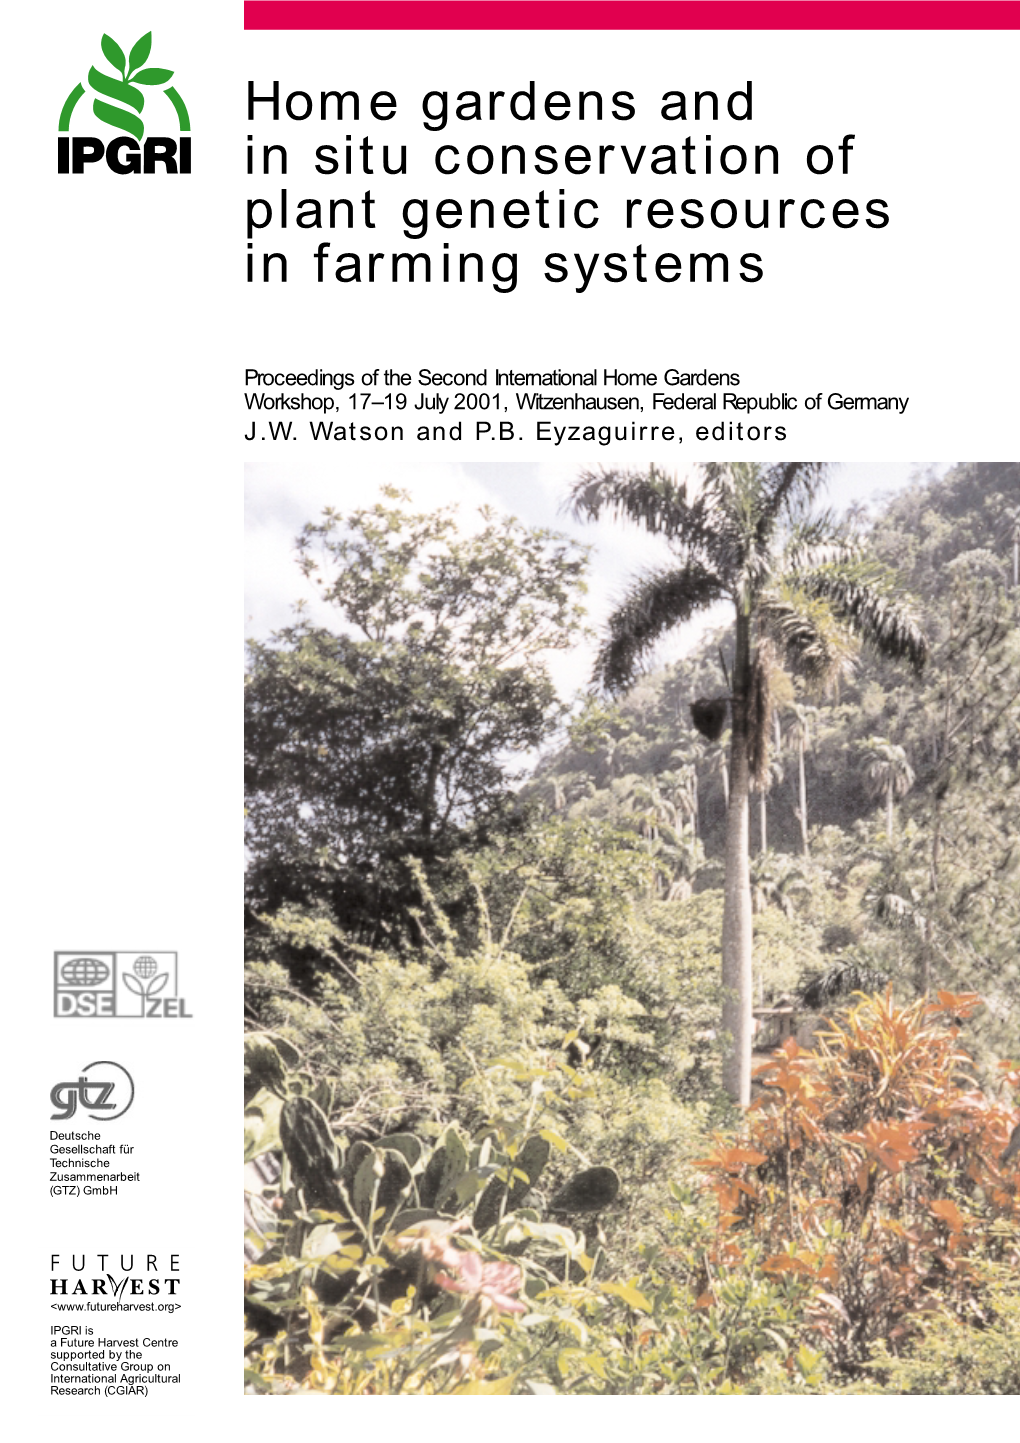 Home Gardens and in Situ Conservation of Plant Genetic Resources in Farming Systems